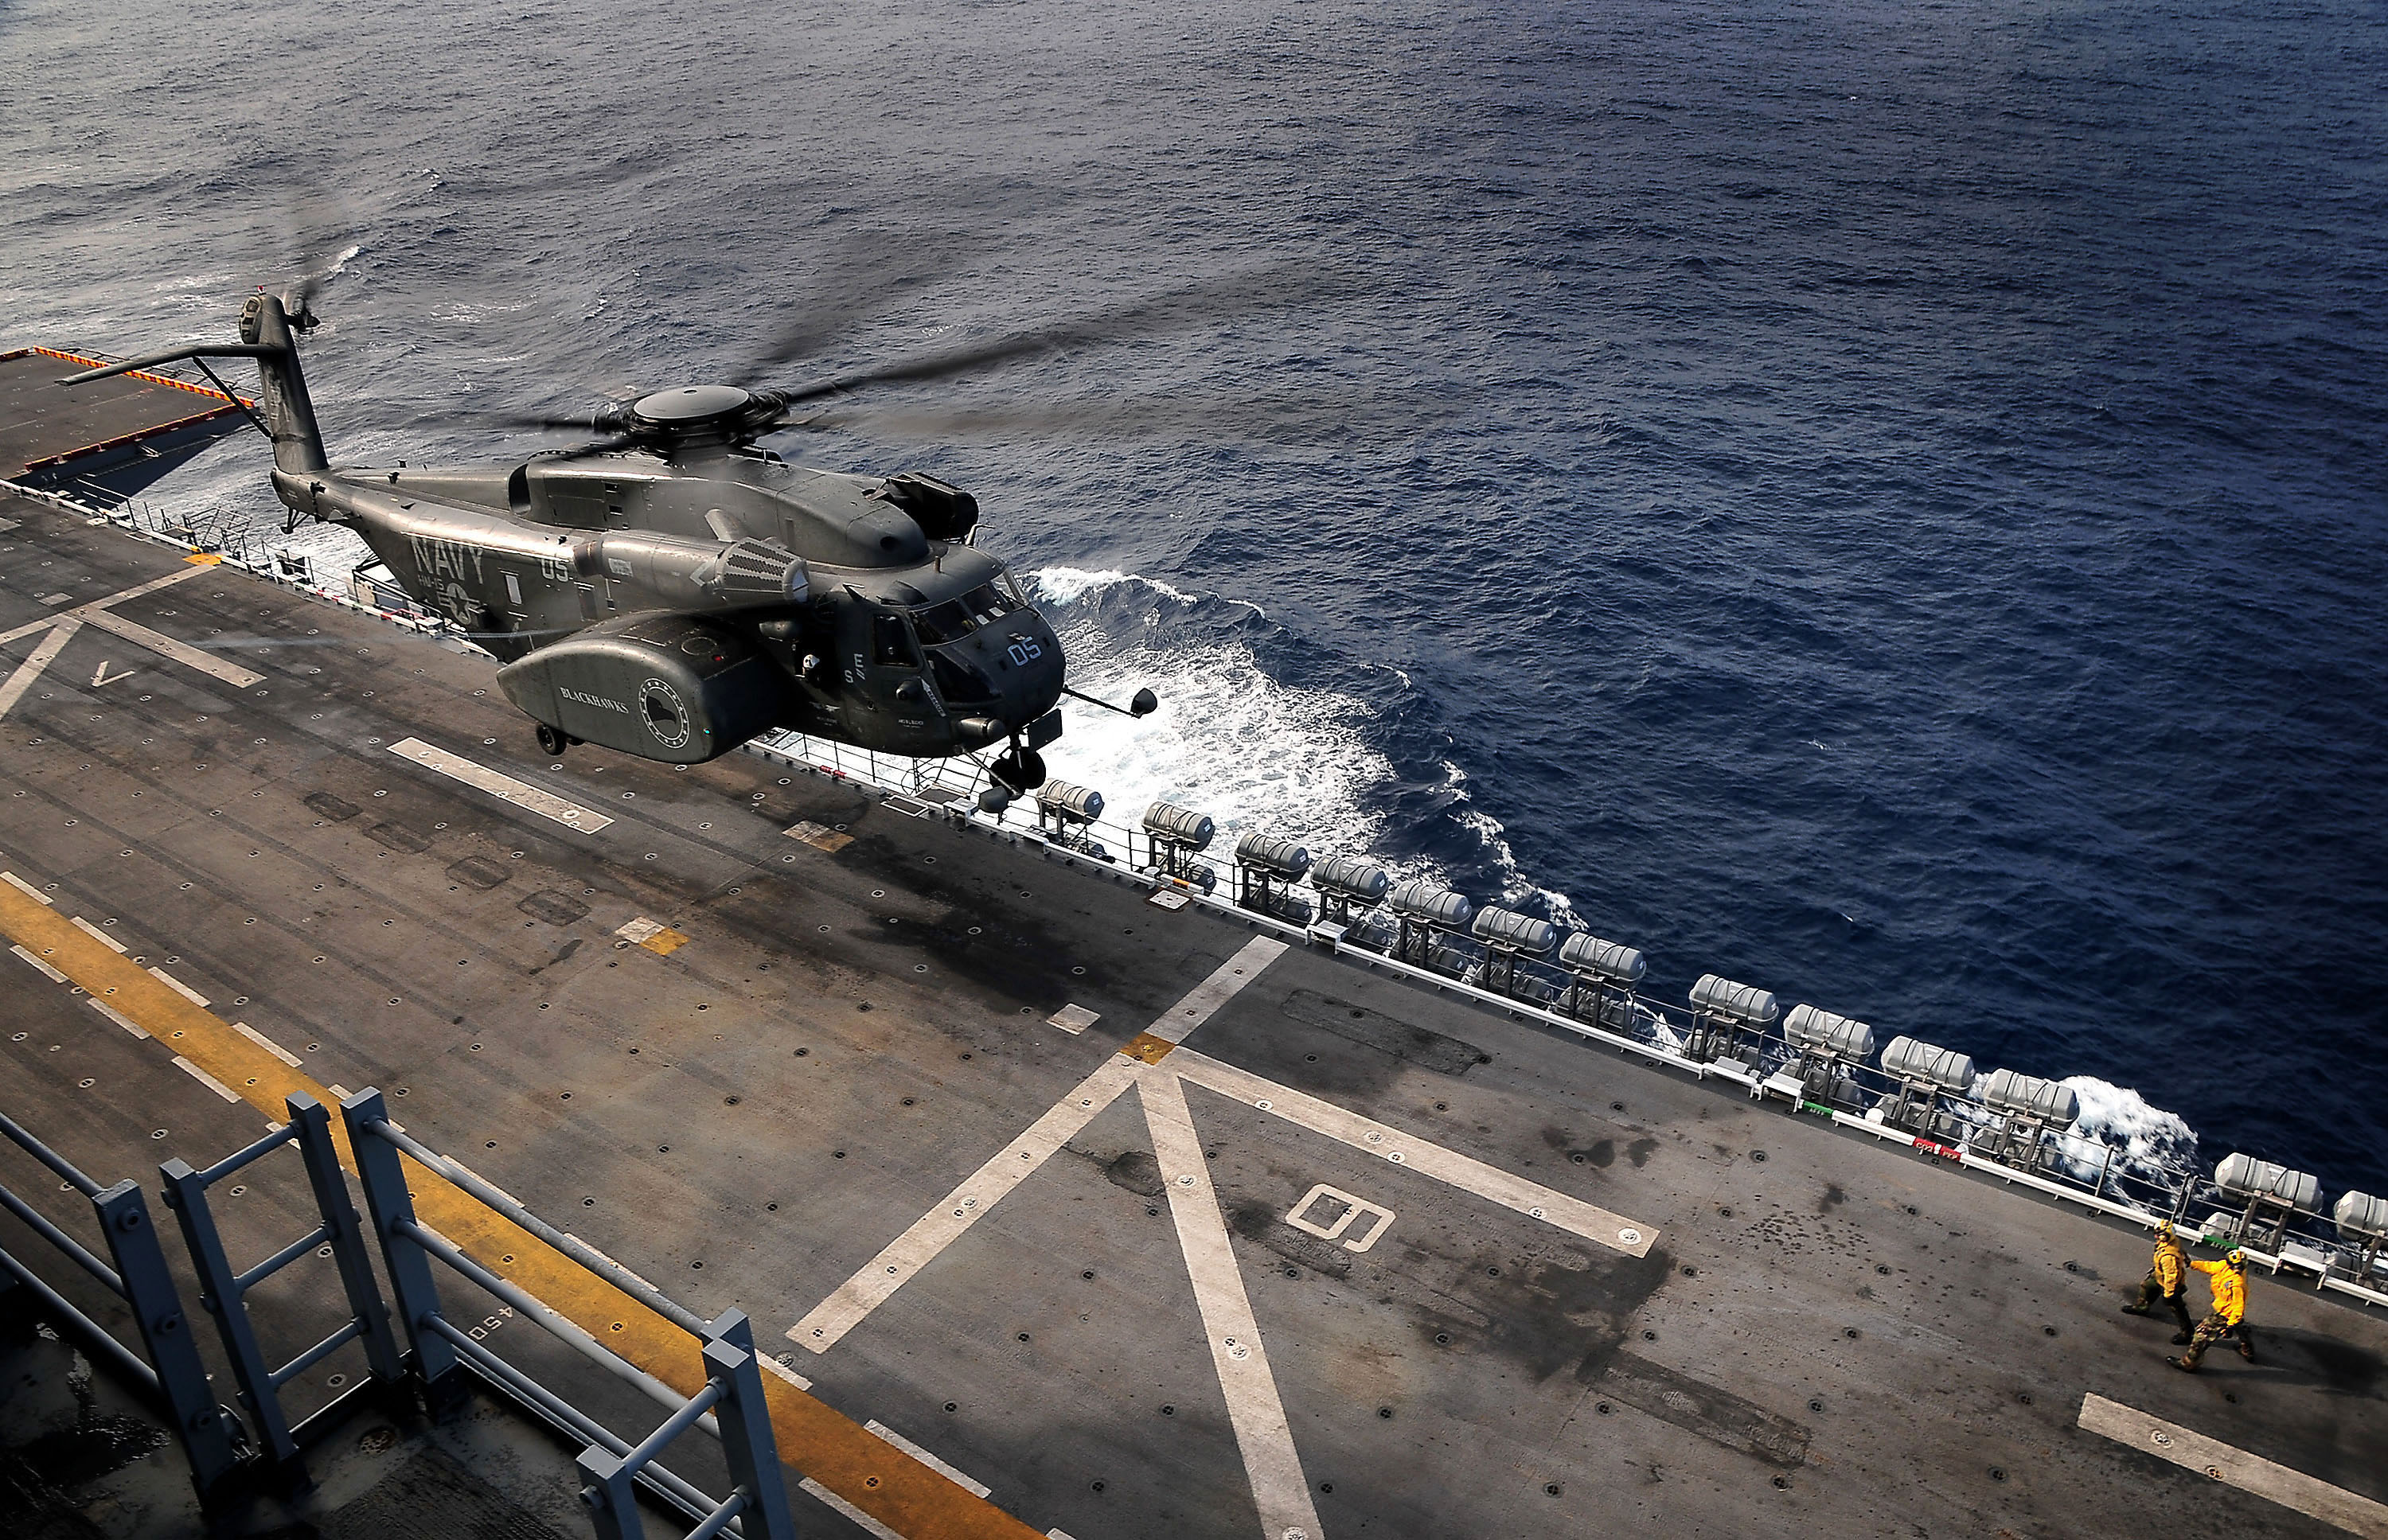 US Navy 080808-N-4774B-466 An MH-53E Sea Dragon assigned to Mine Counter-Measures Squadron (HM) 15 lands aboard the amphibious assault ship USS Tarawa (LHA 1)